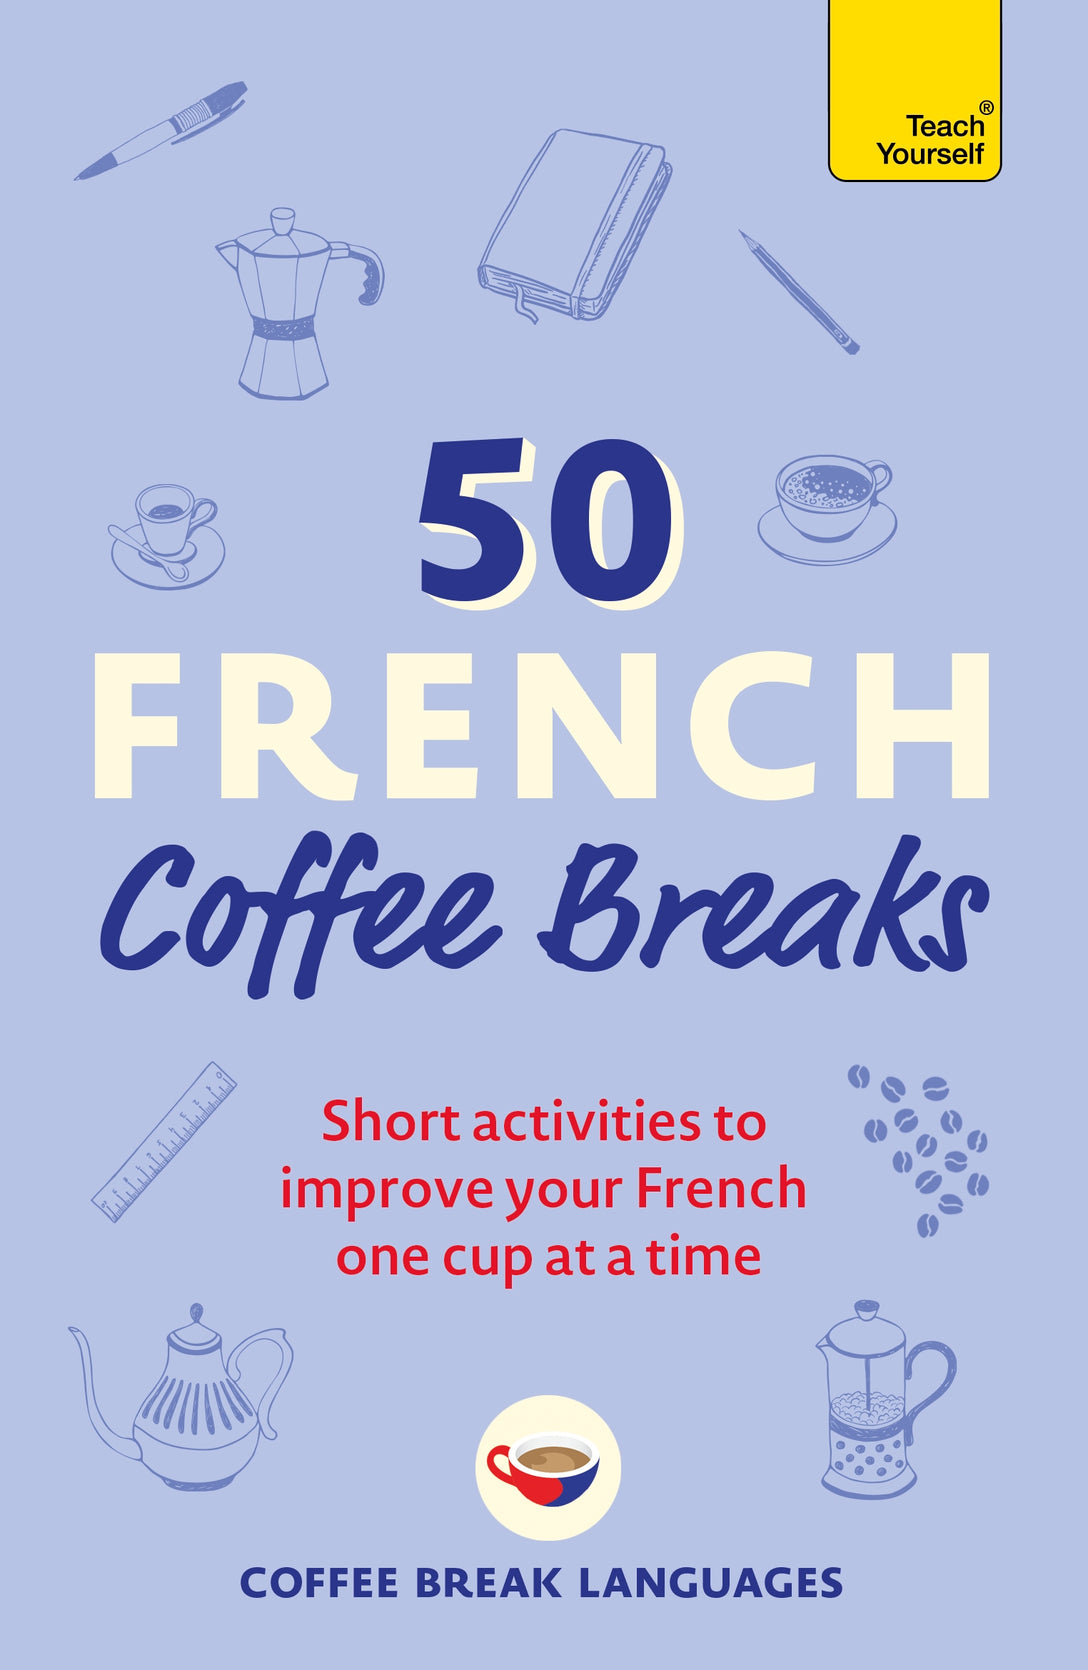 50 French Coffee Breaks by Coffee Break Languages